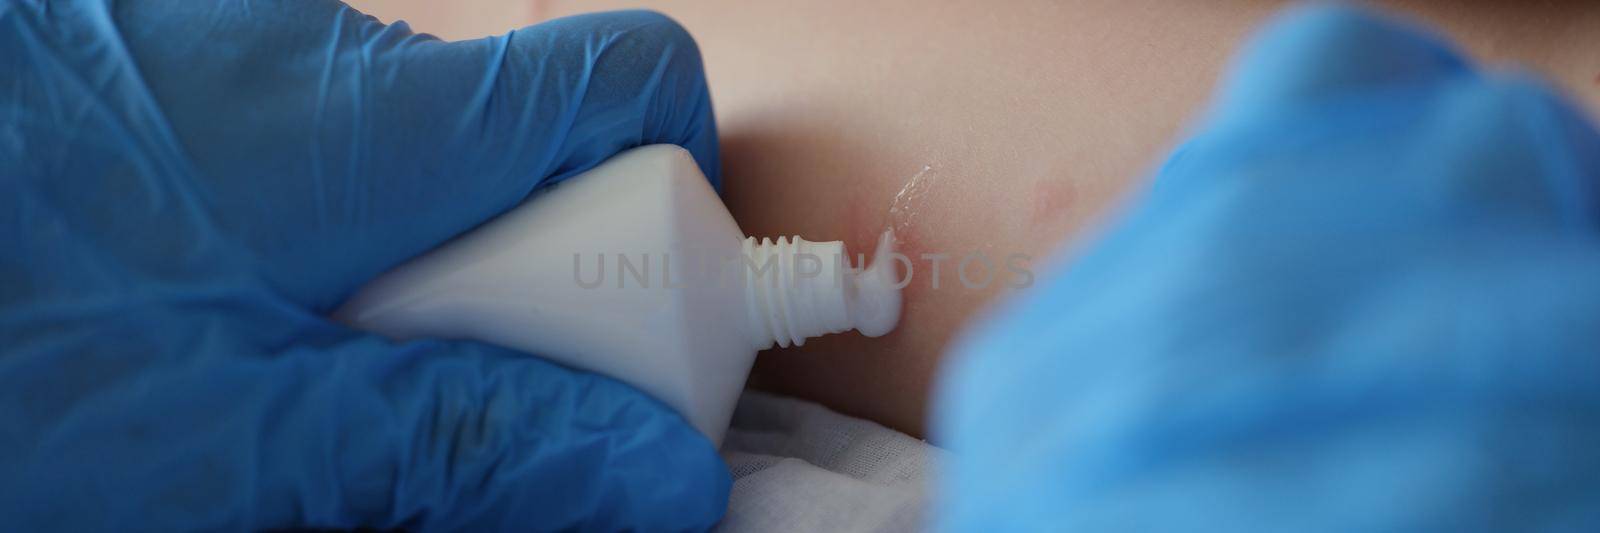 Close-up of doctor examine red rash on kid legs in hospital and apply cream from tube. Child on appointment, irritation on body. Medicine, health concept